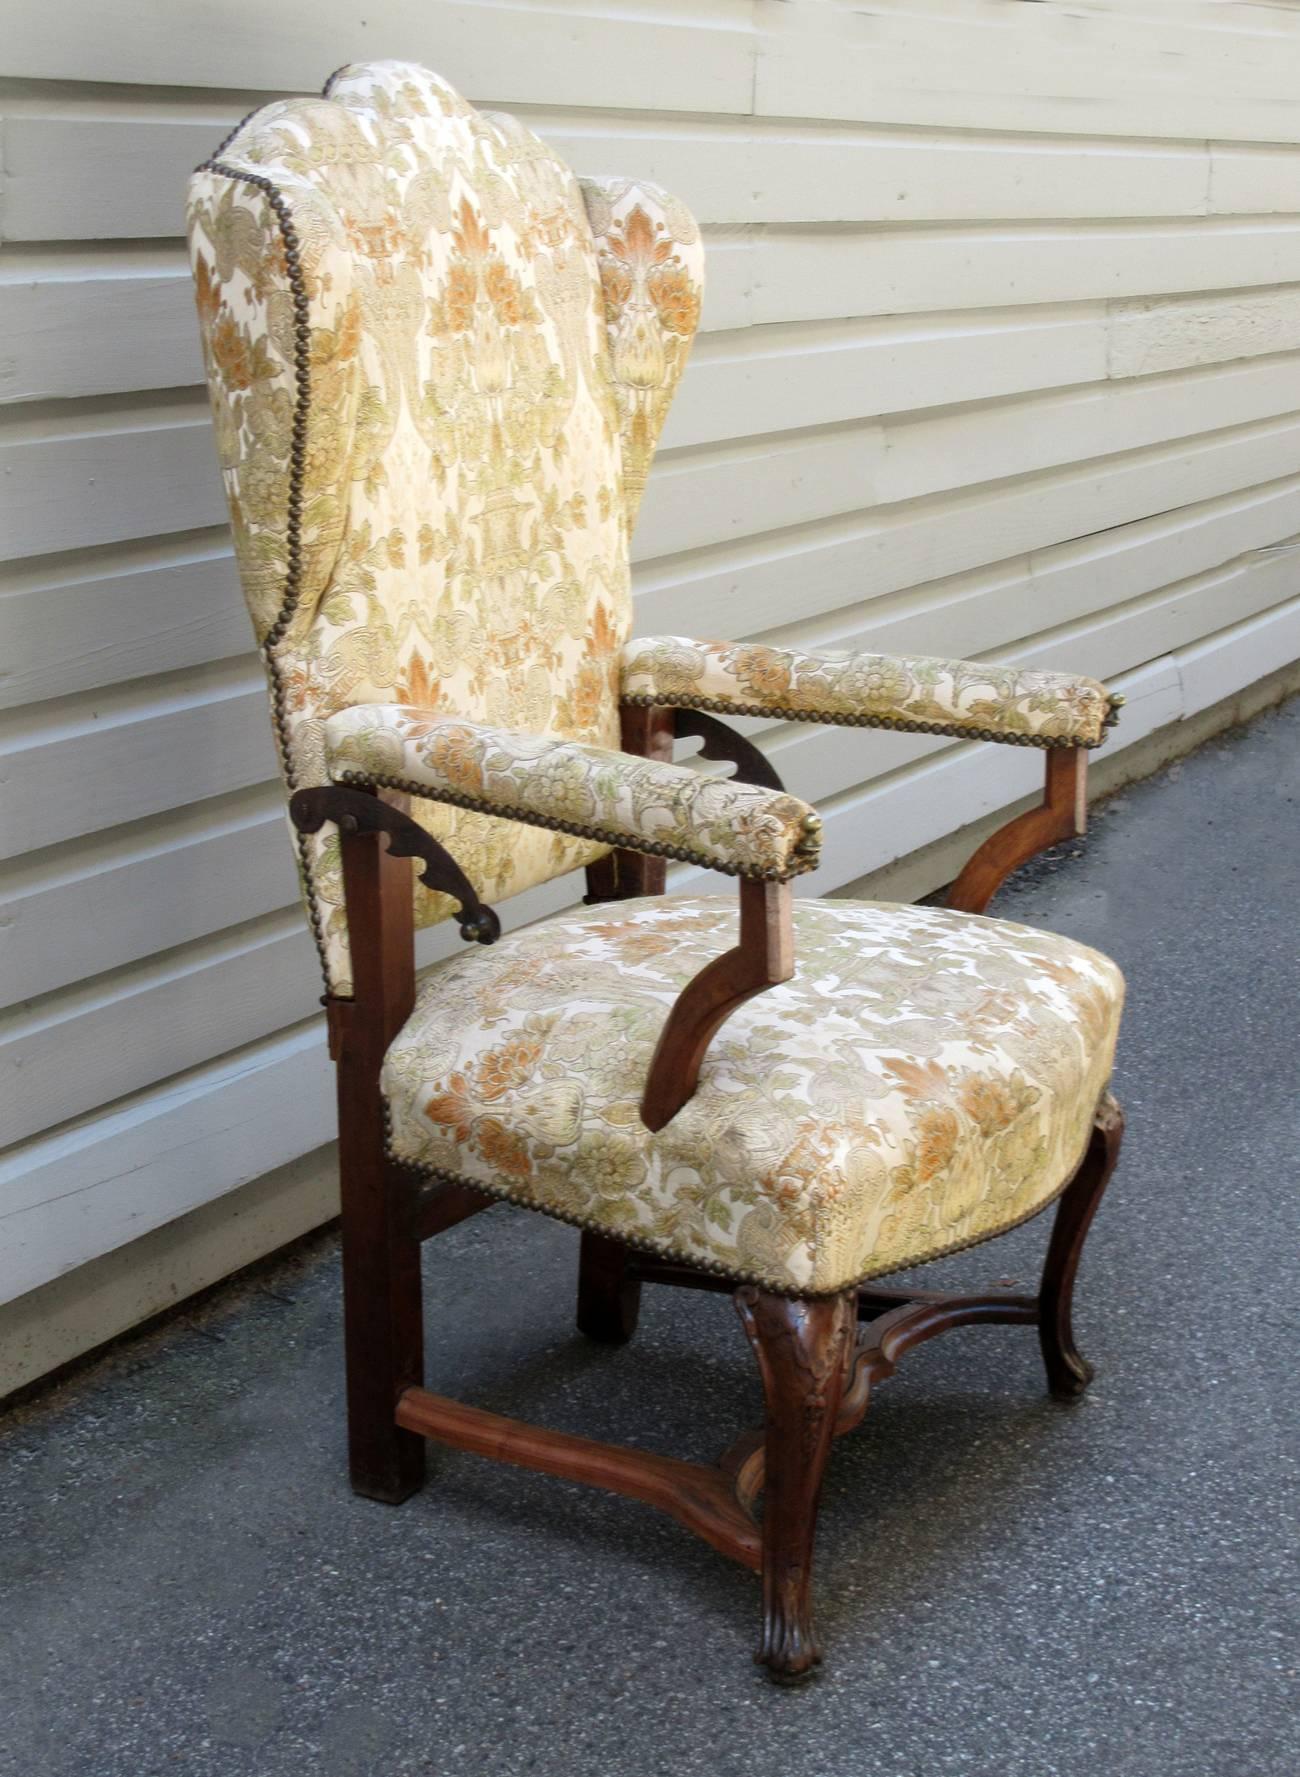 A late 18th century French Provincial reclining upholstered wingback chair, circa 1760, with steel extenders and William & Morris style upholstery in overall good condition.